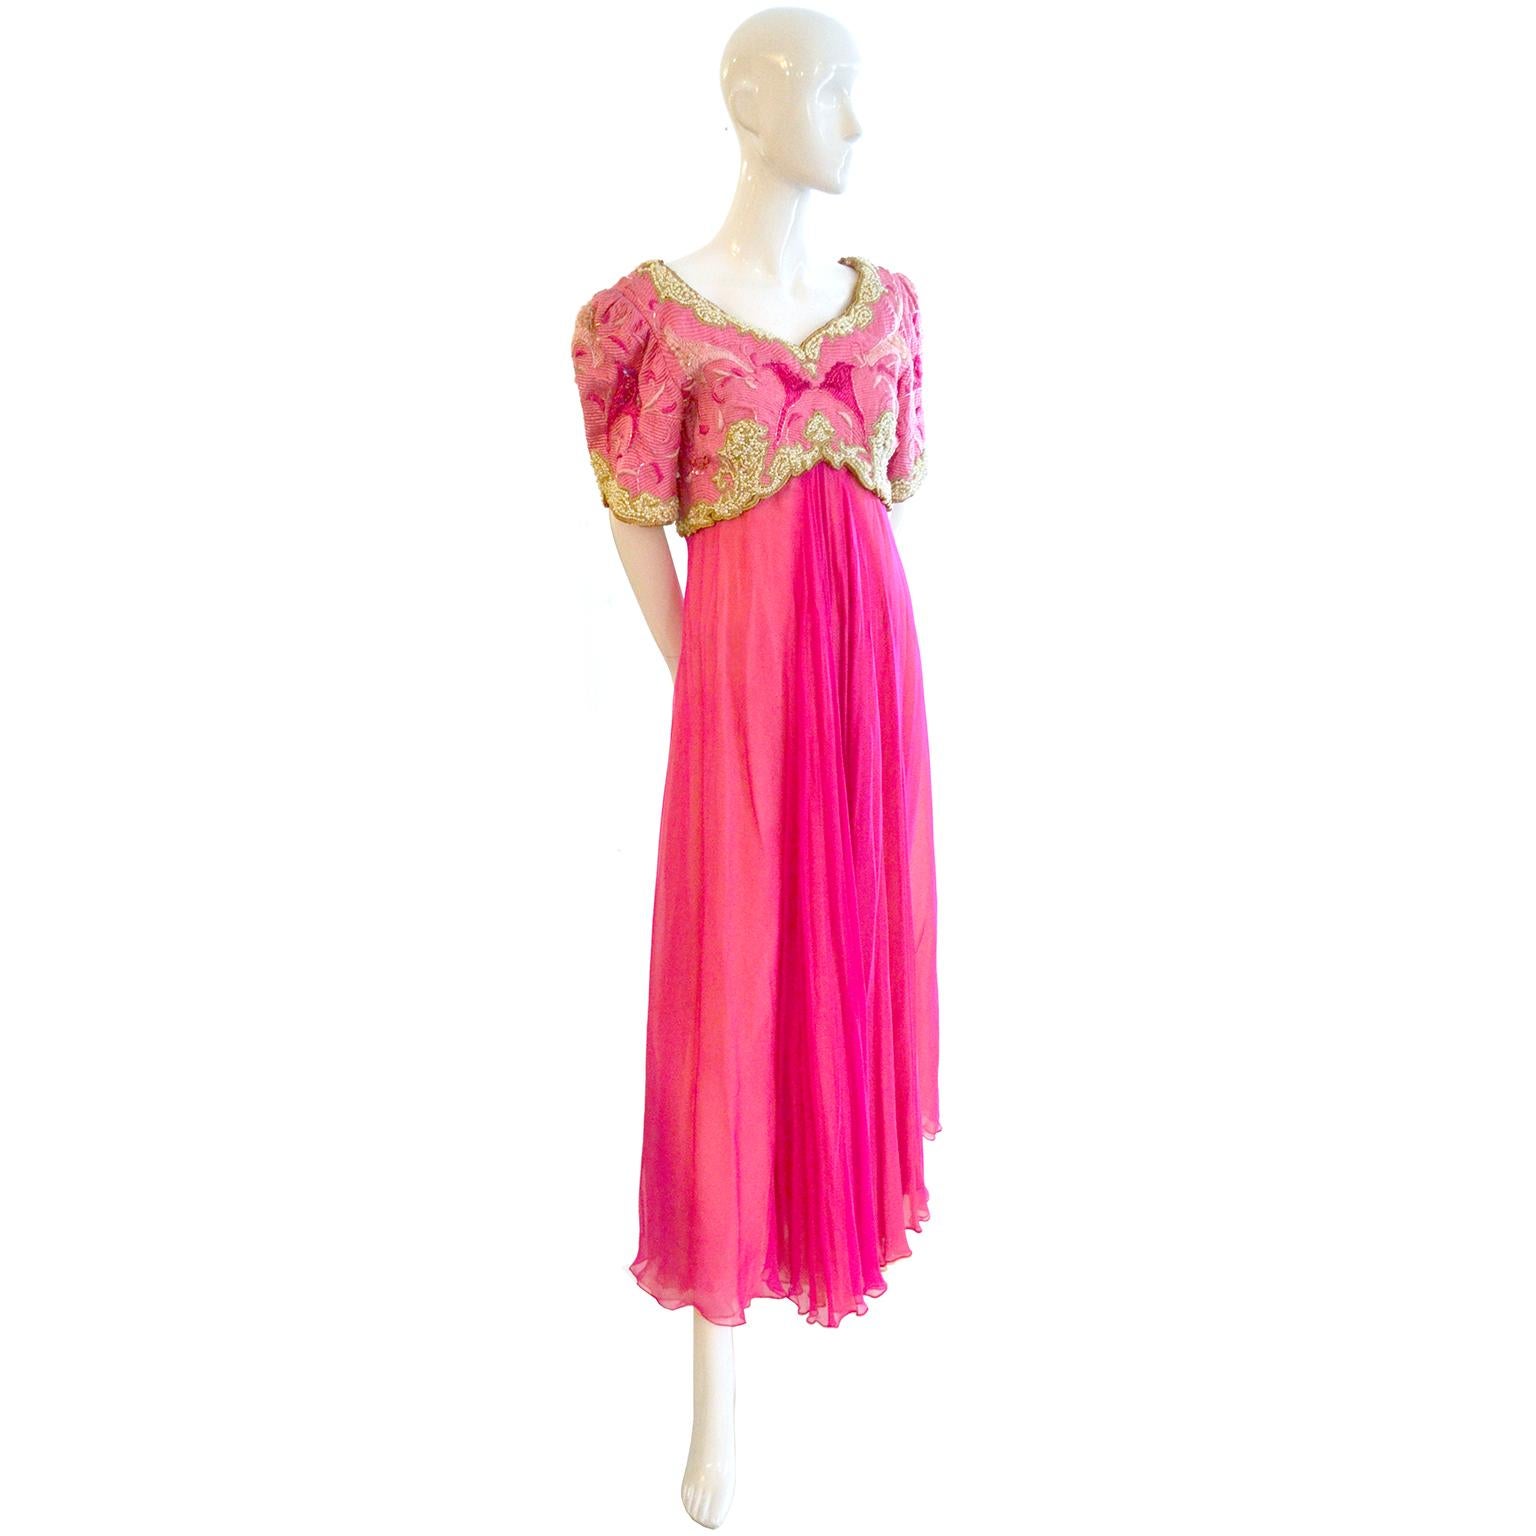 This is an exceptional Richilene New York vintage 1980's formal evening gown in a feather light pink silk chiffon with a heavily embroidered, beaded over bodice with stacked sequins.  There are beautiful seed pearls and the embroidery includes